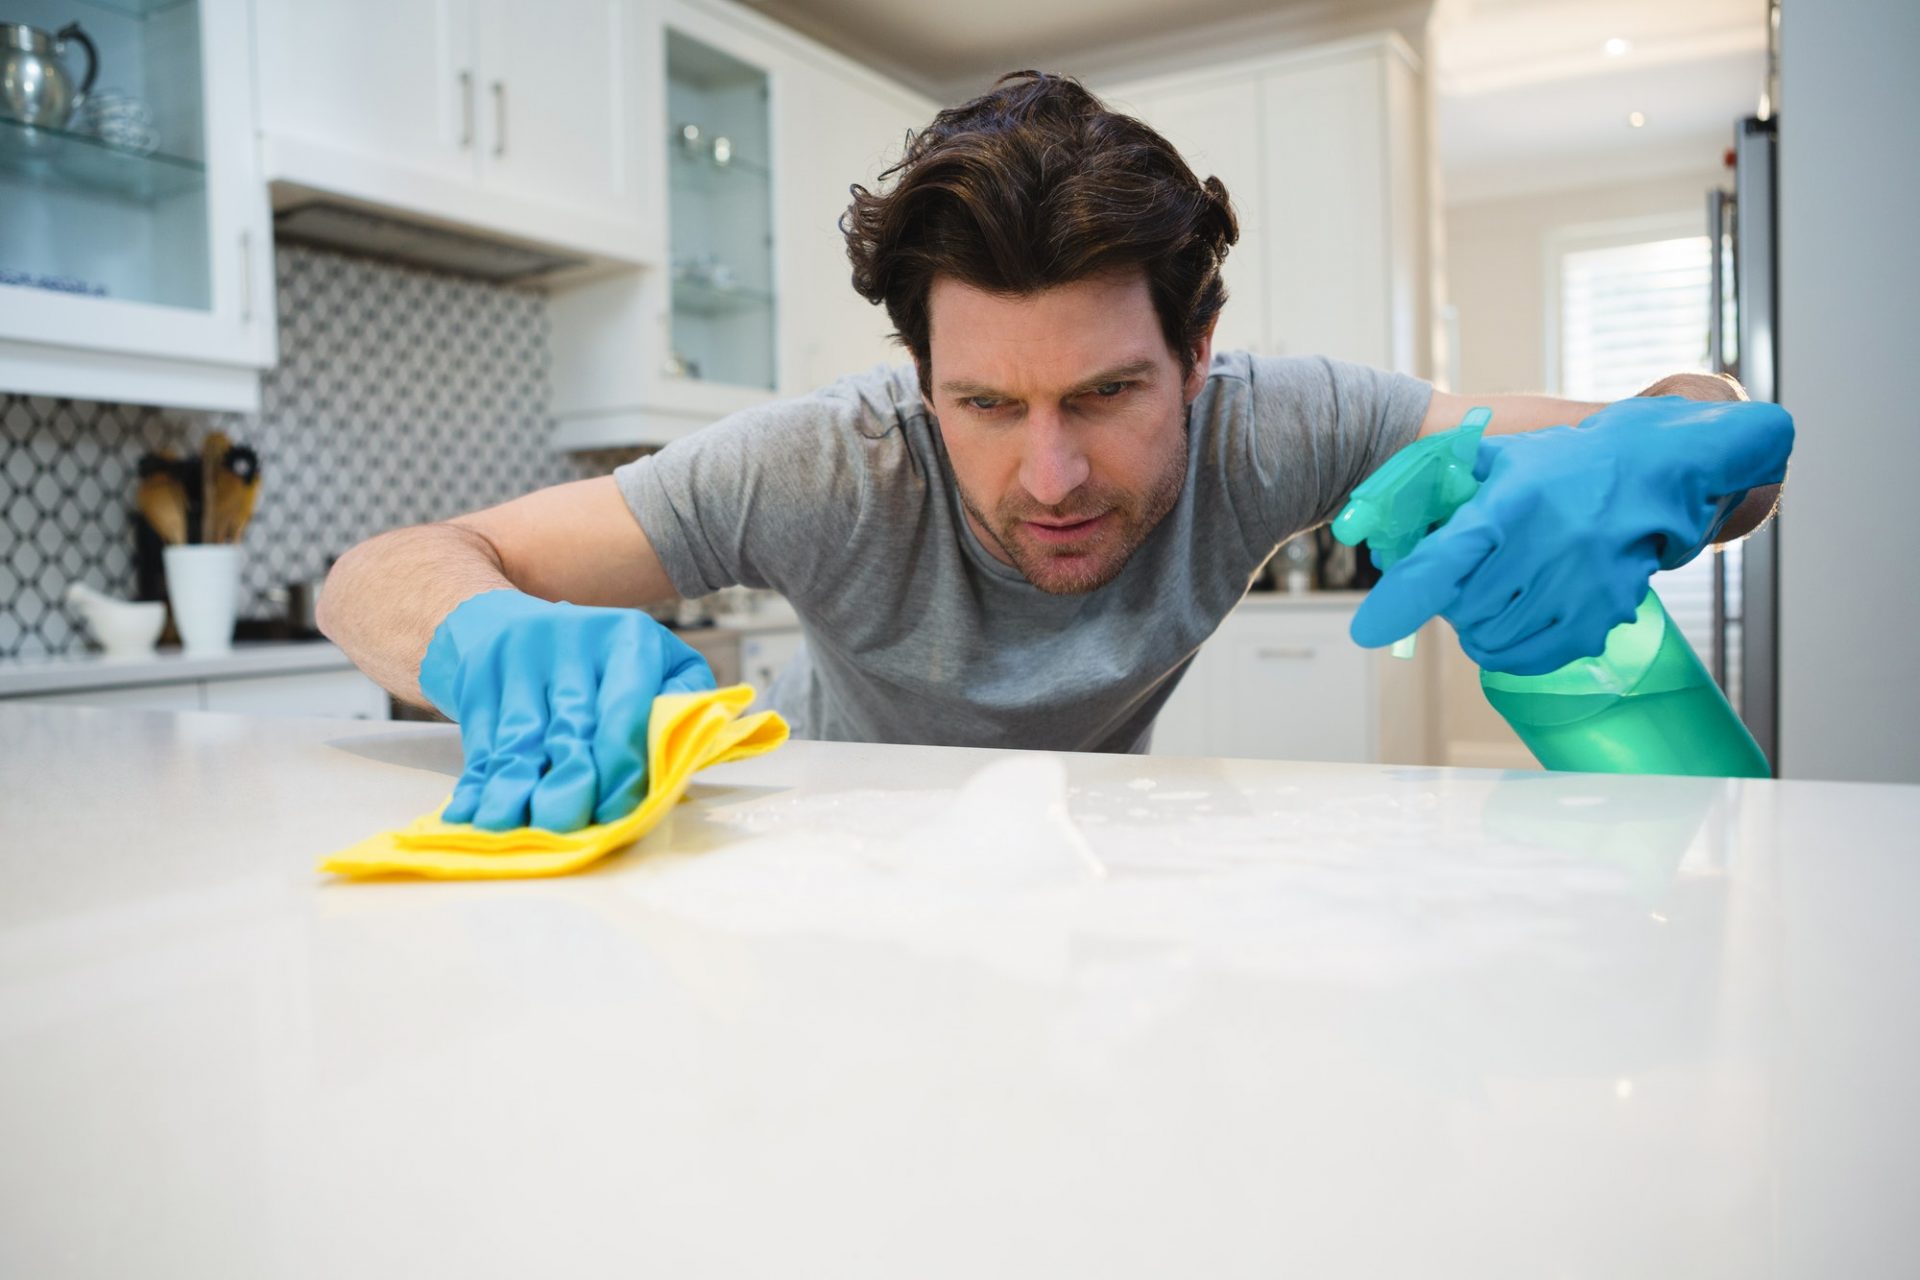 Man cleaning kitchen worktop at home